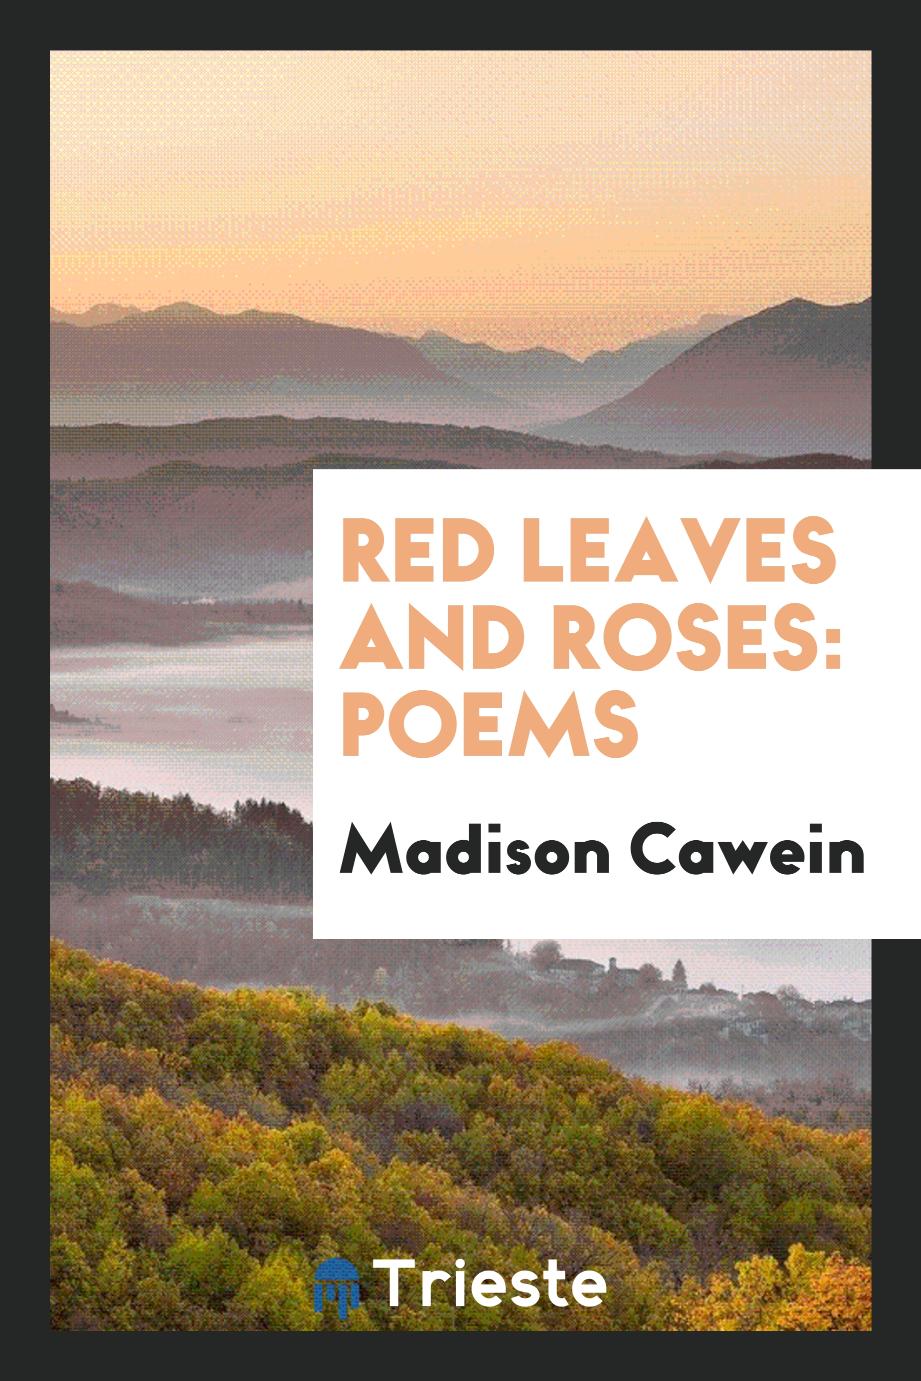 Red leaves and roses: poems